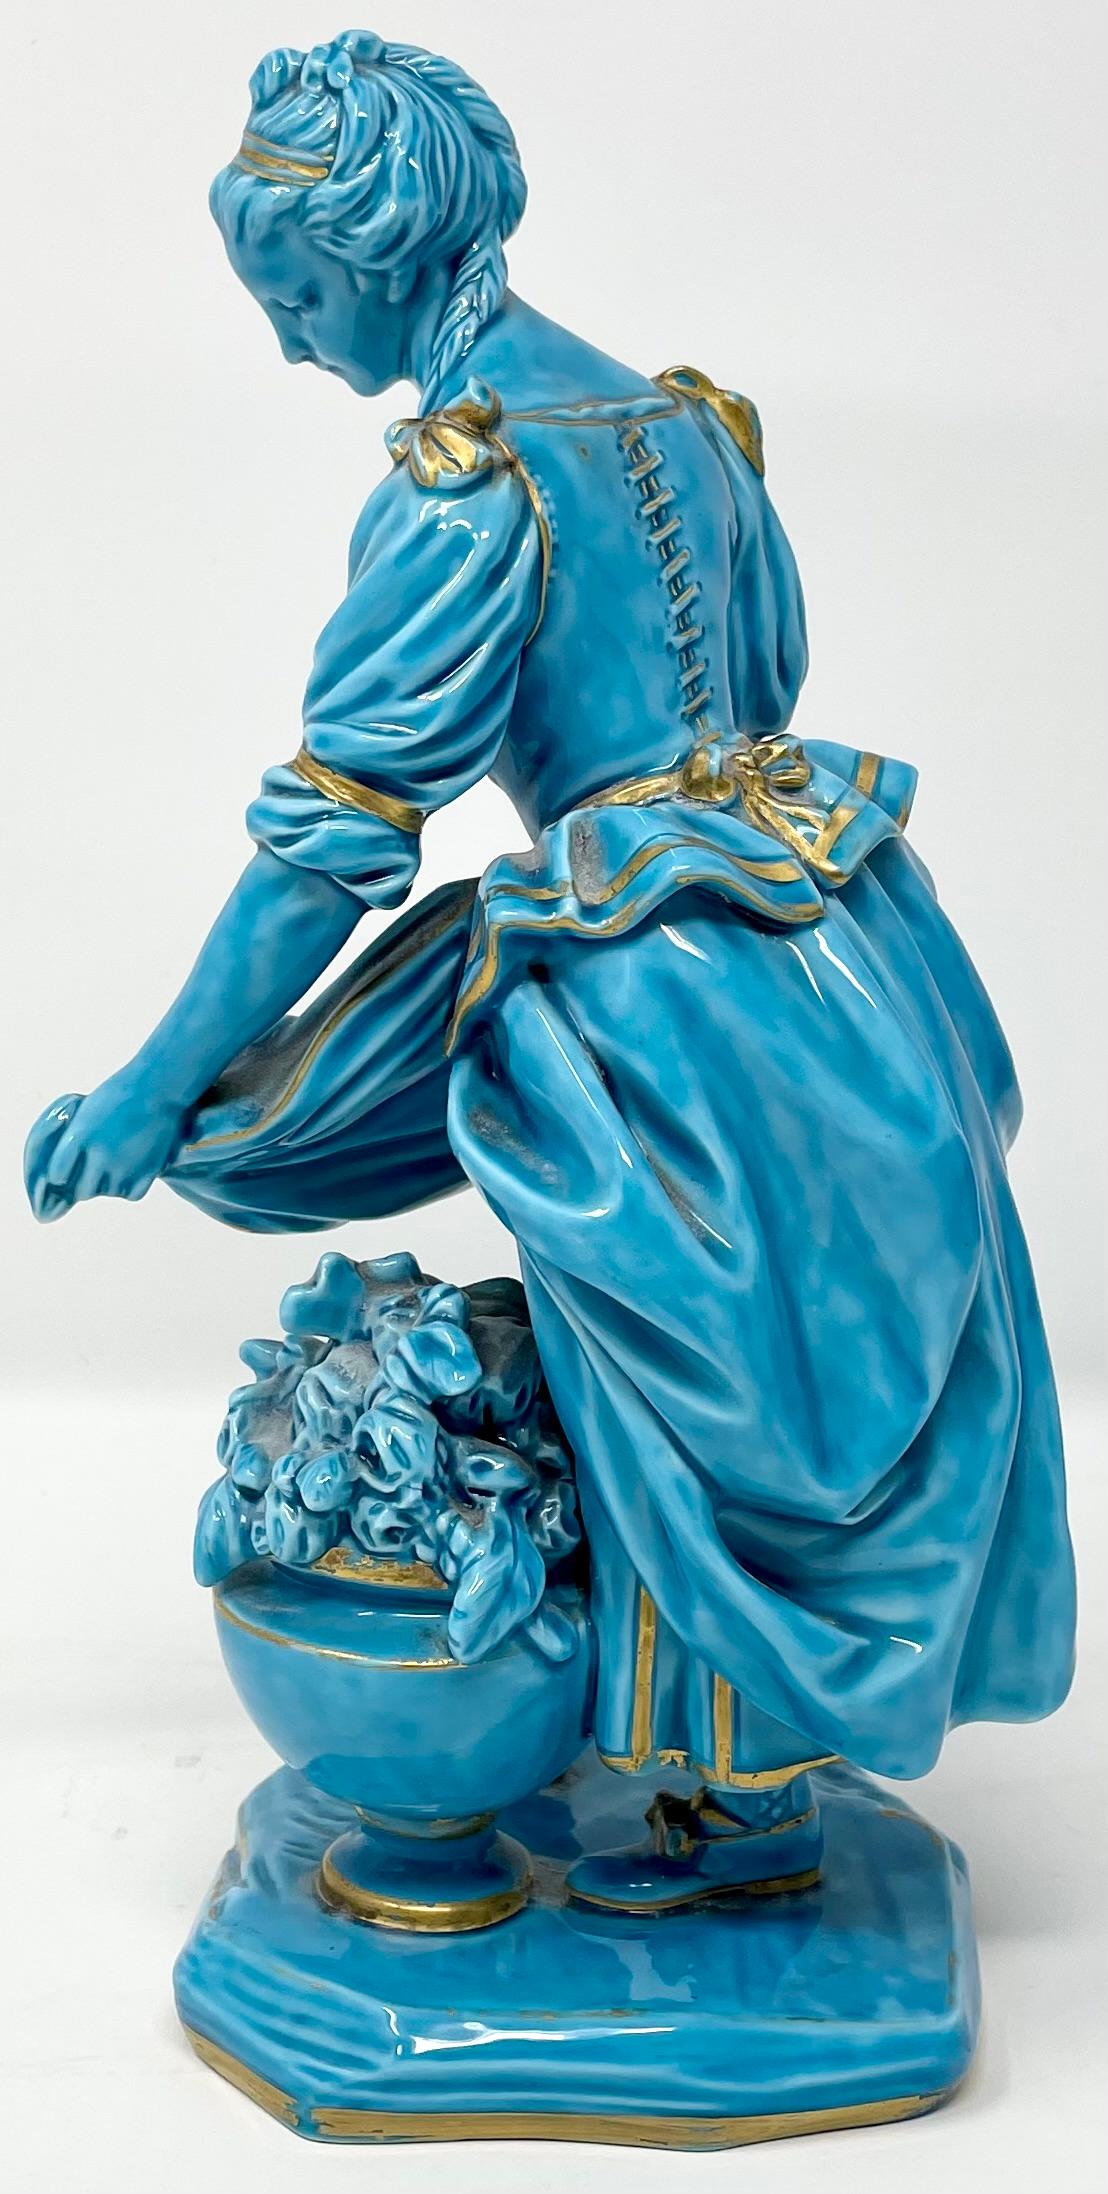 Set of 4 Antique French Porcelain Turquoise & Gold Table Figurines, Circa 1880. For Sale 1